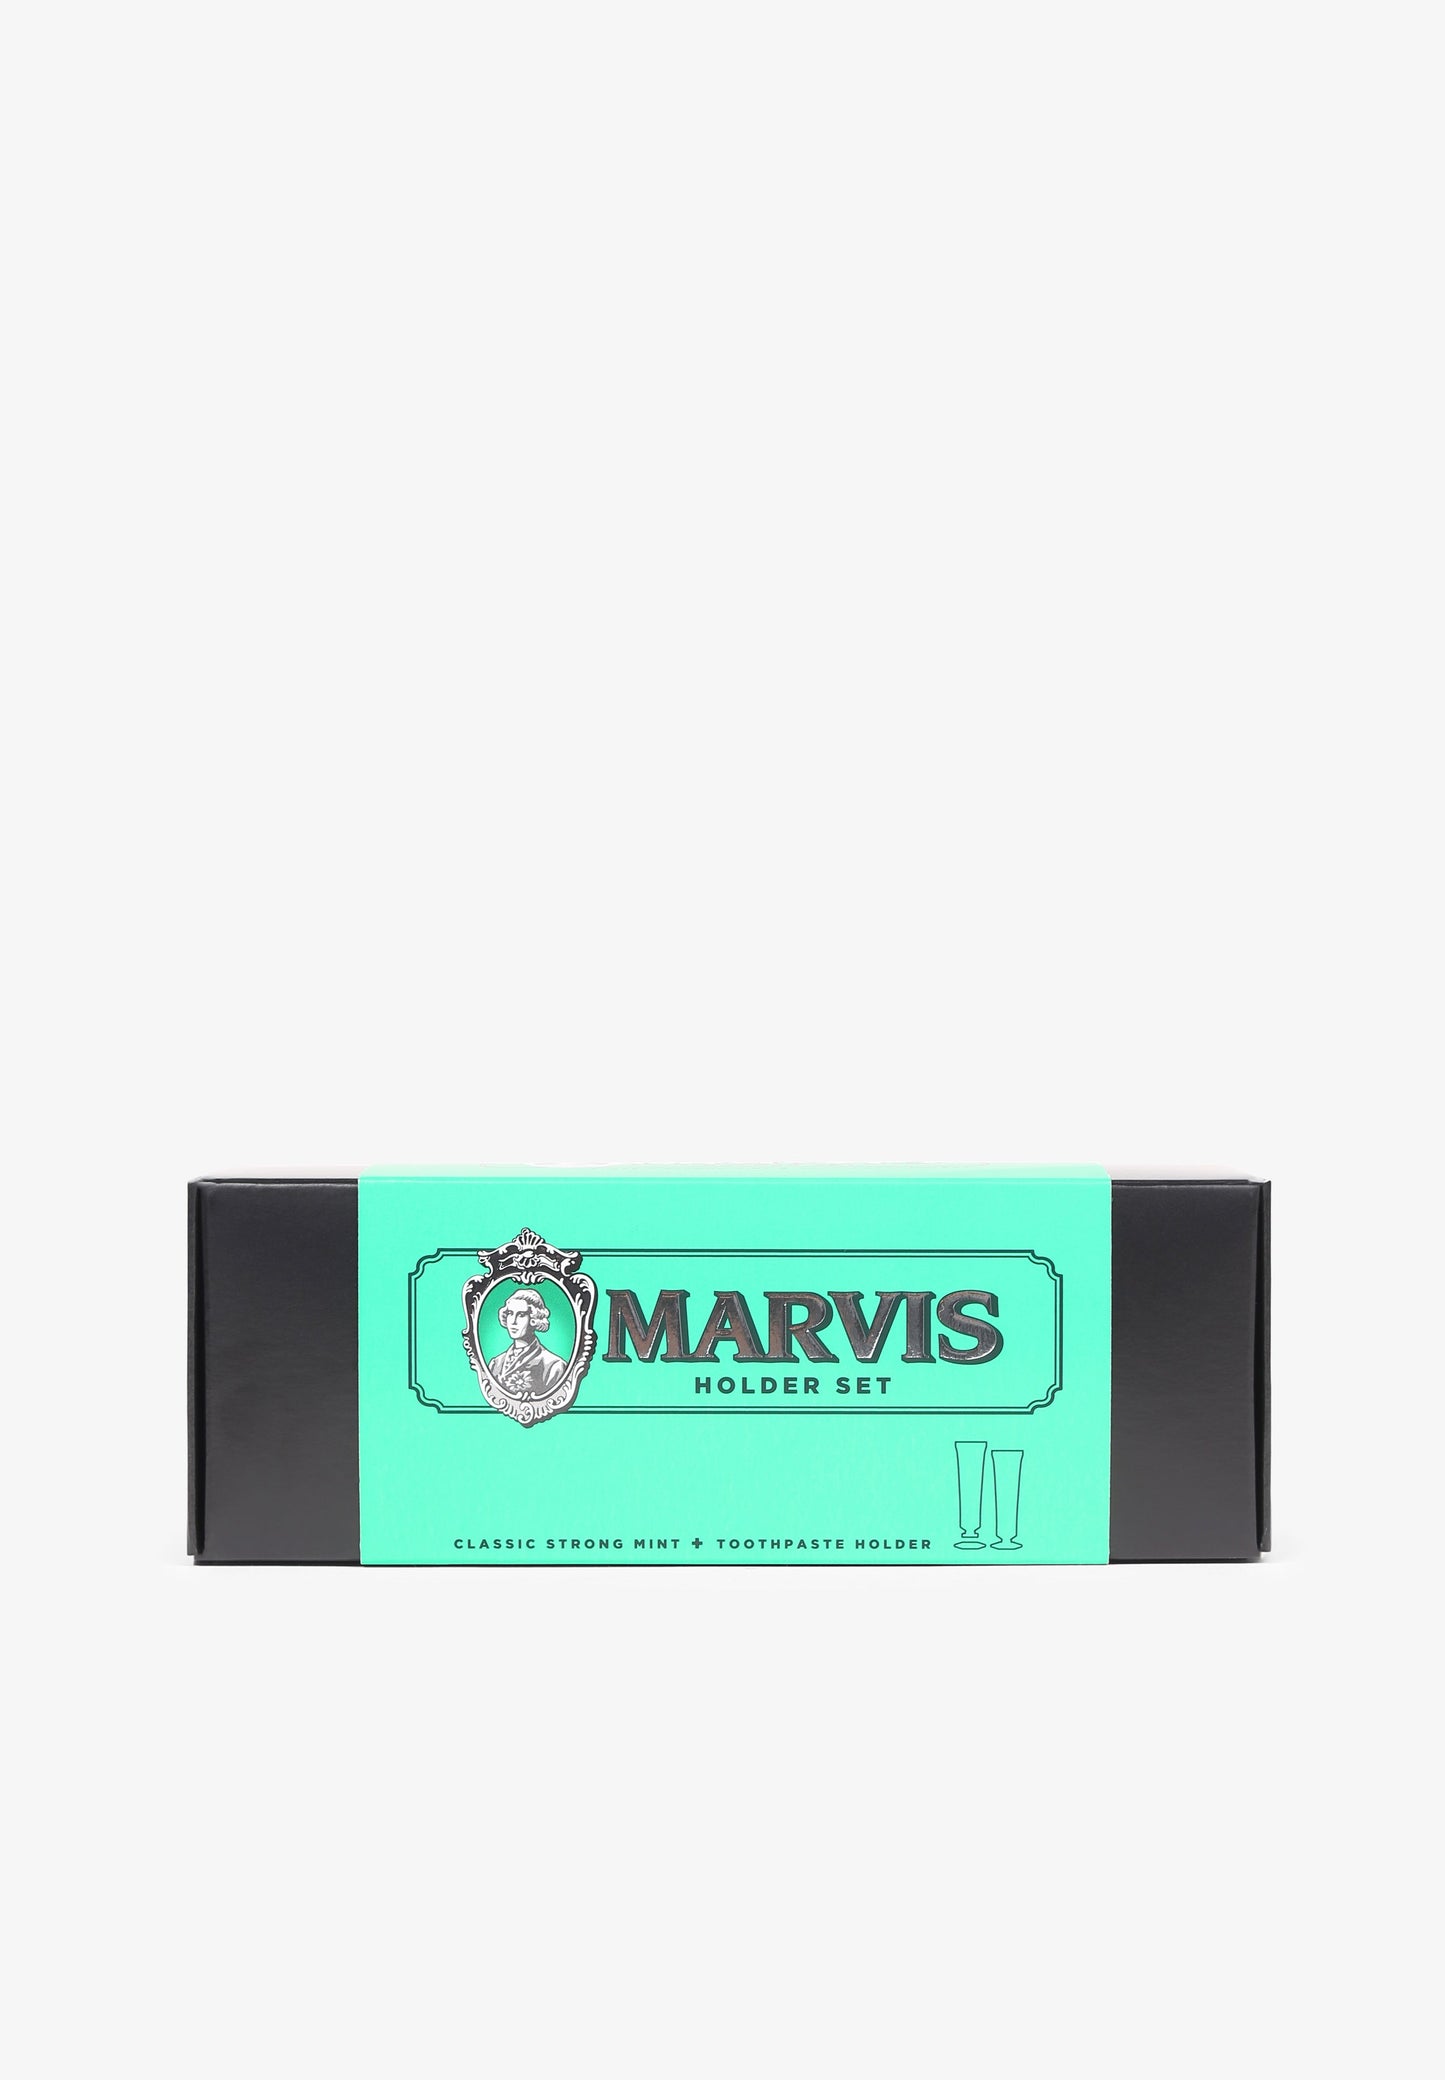 MARVIS | DENTÍFRICO CLASSIC STRONG MINT 85 ML + SUPORTE